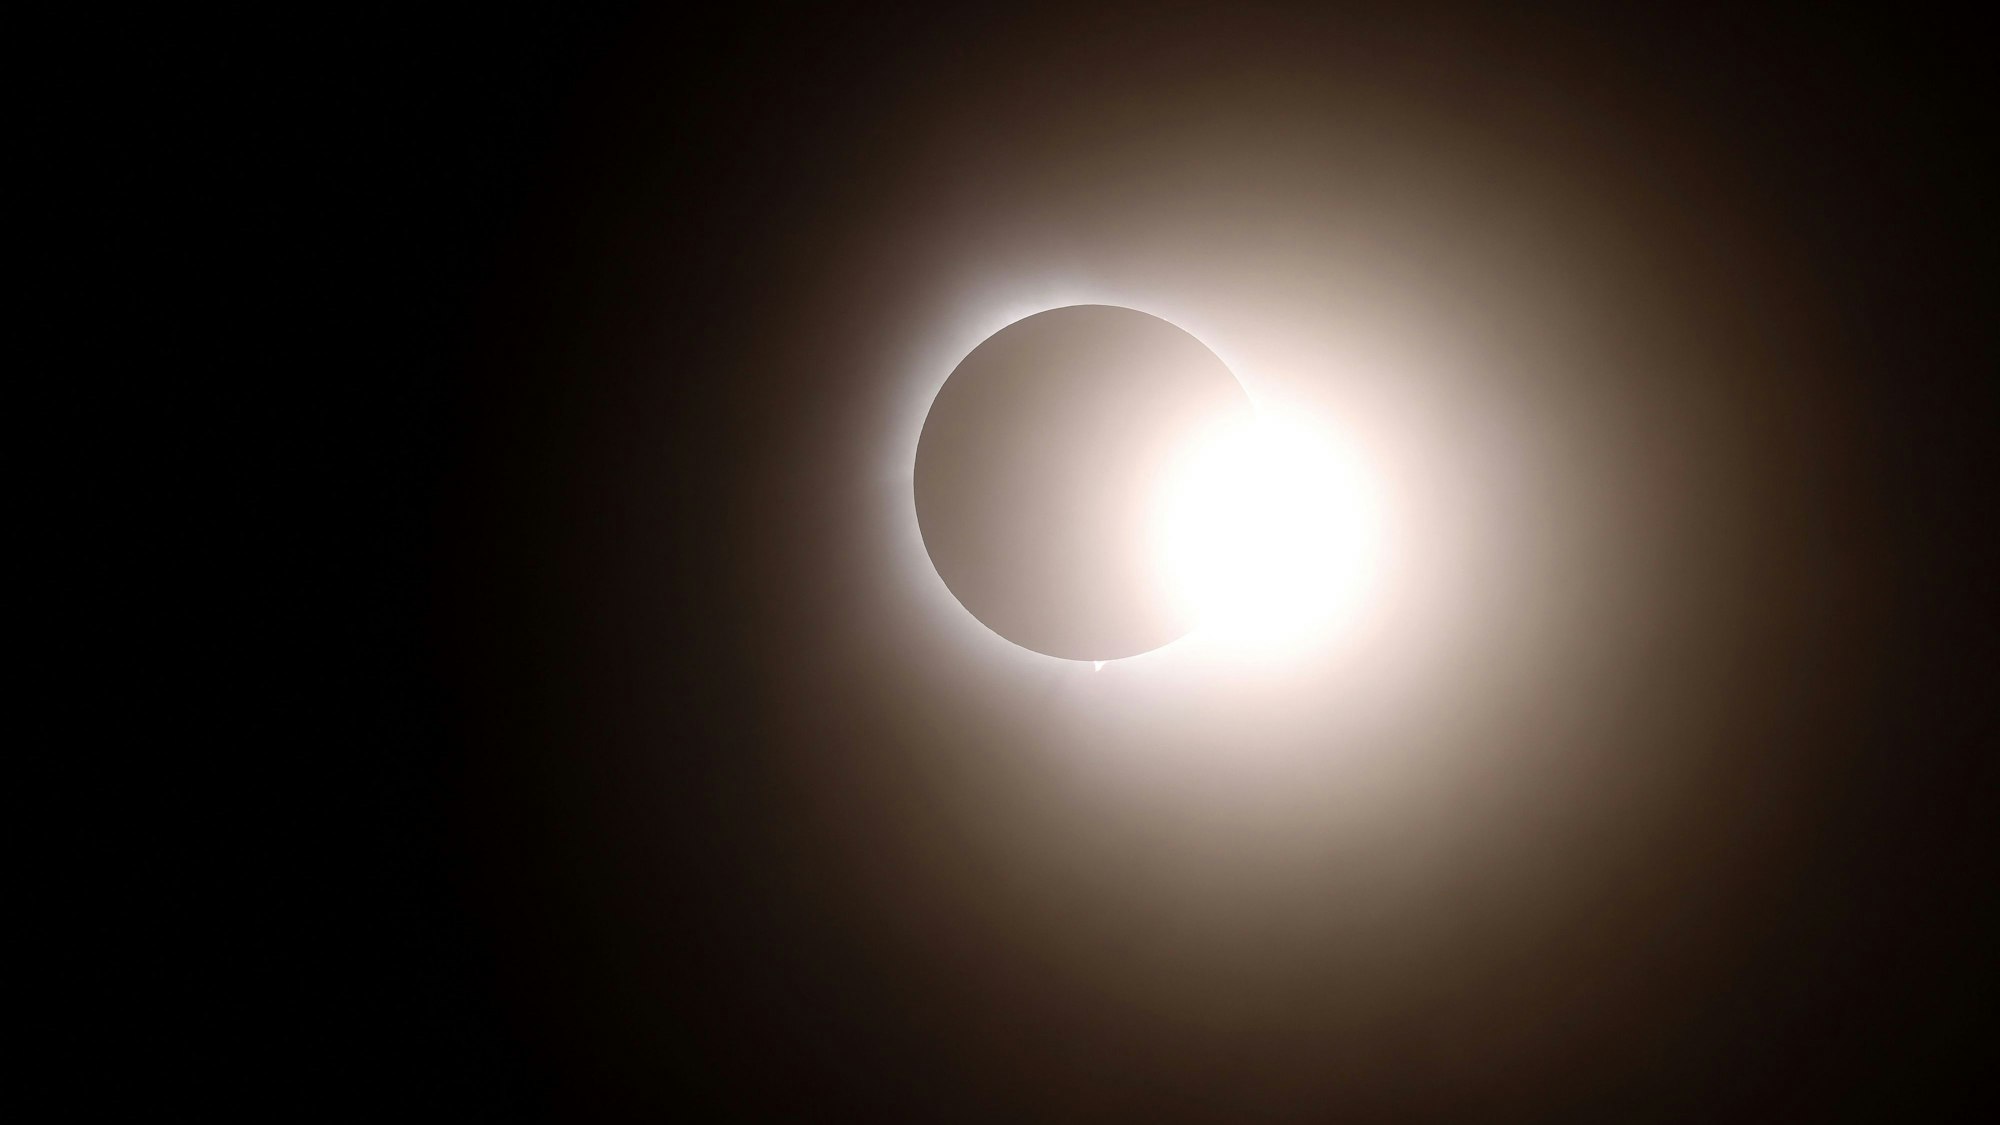 MARTIN, OHIO - APRIL 08: The moon passes in front of the sun during a solar eclipse on April 08, 2024 in Martin Ohio. Millions of people have flocked to areas across North America that are in the "path of totality" in order to experience a total solar eclipse. During the event, the moon will pass in between the sun and the Earth, appearing to block the sun.   Gregory Shamus/Getty Images/AFP (Photo by Gregory Shamus / GETTY IMAGES NORTH AMERICA / Getty Images via AFP)